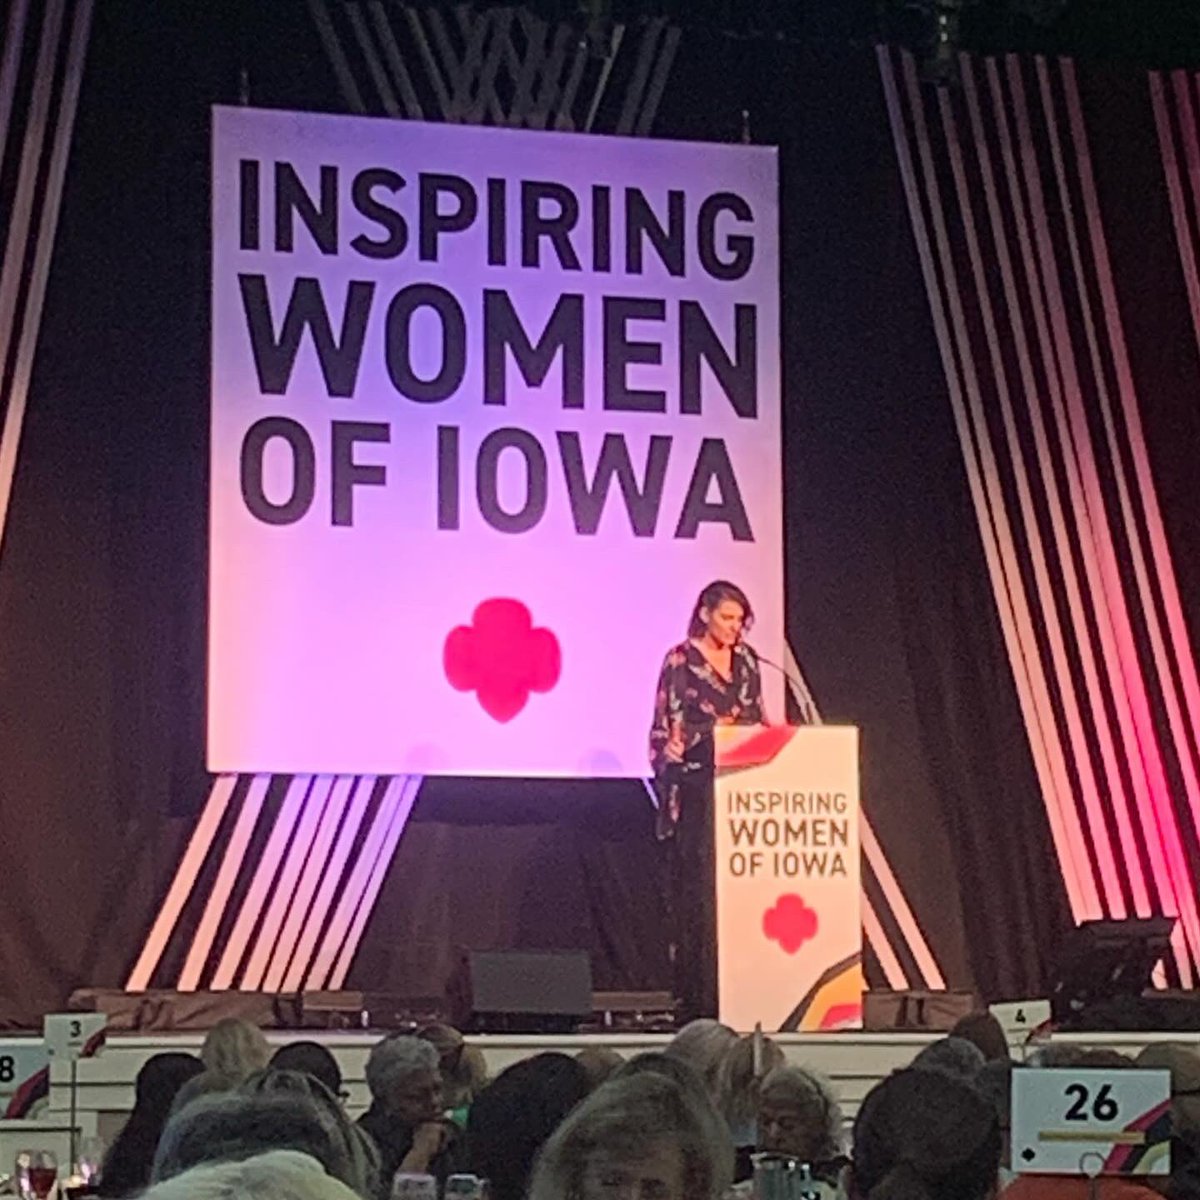 Congratulations to all of the honorees for Inspiring Women of Iowa! Our campaign is grateful for the work of organizations like Girl Scouts of Iowa that build confidence, character, courage, and advocacy into our next generation of female leaders! #IA03 #IAPolitics